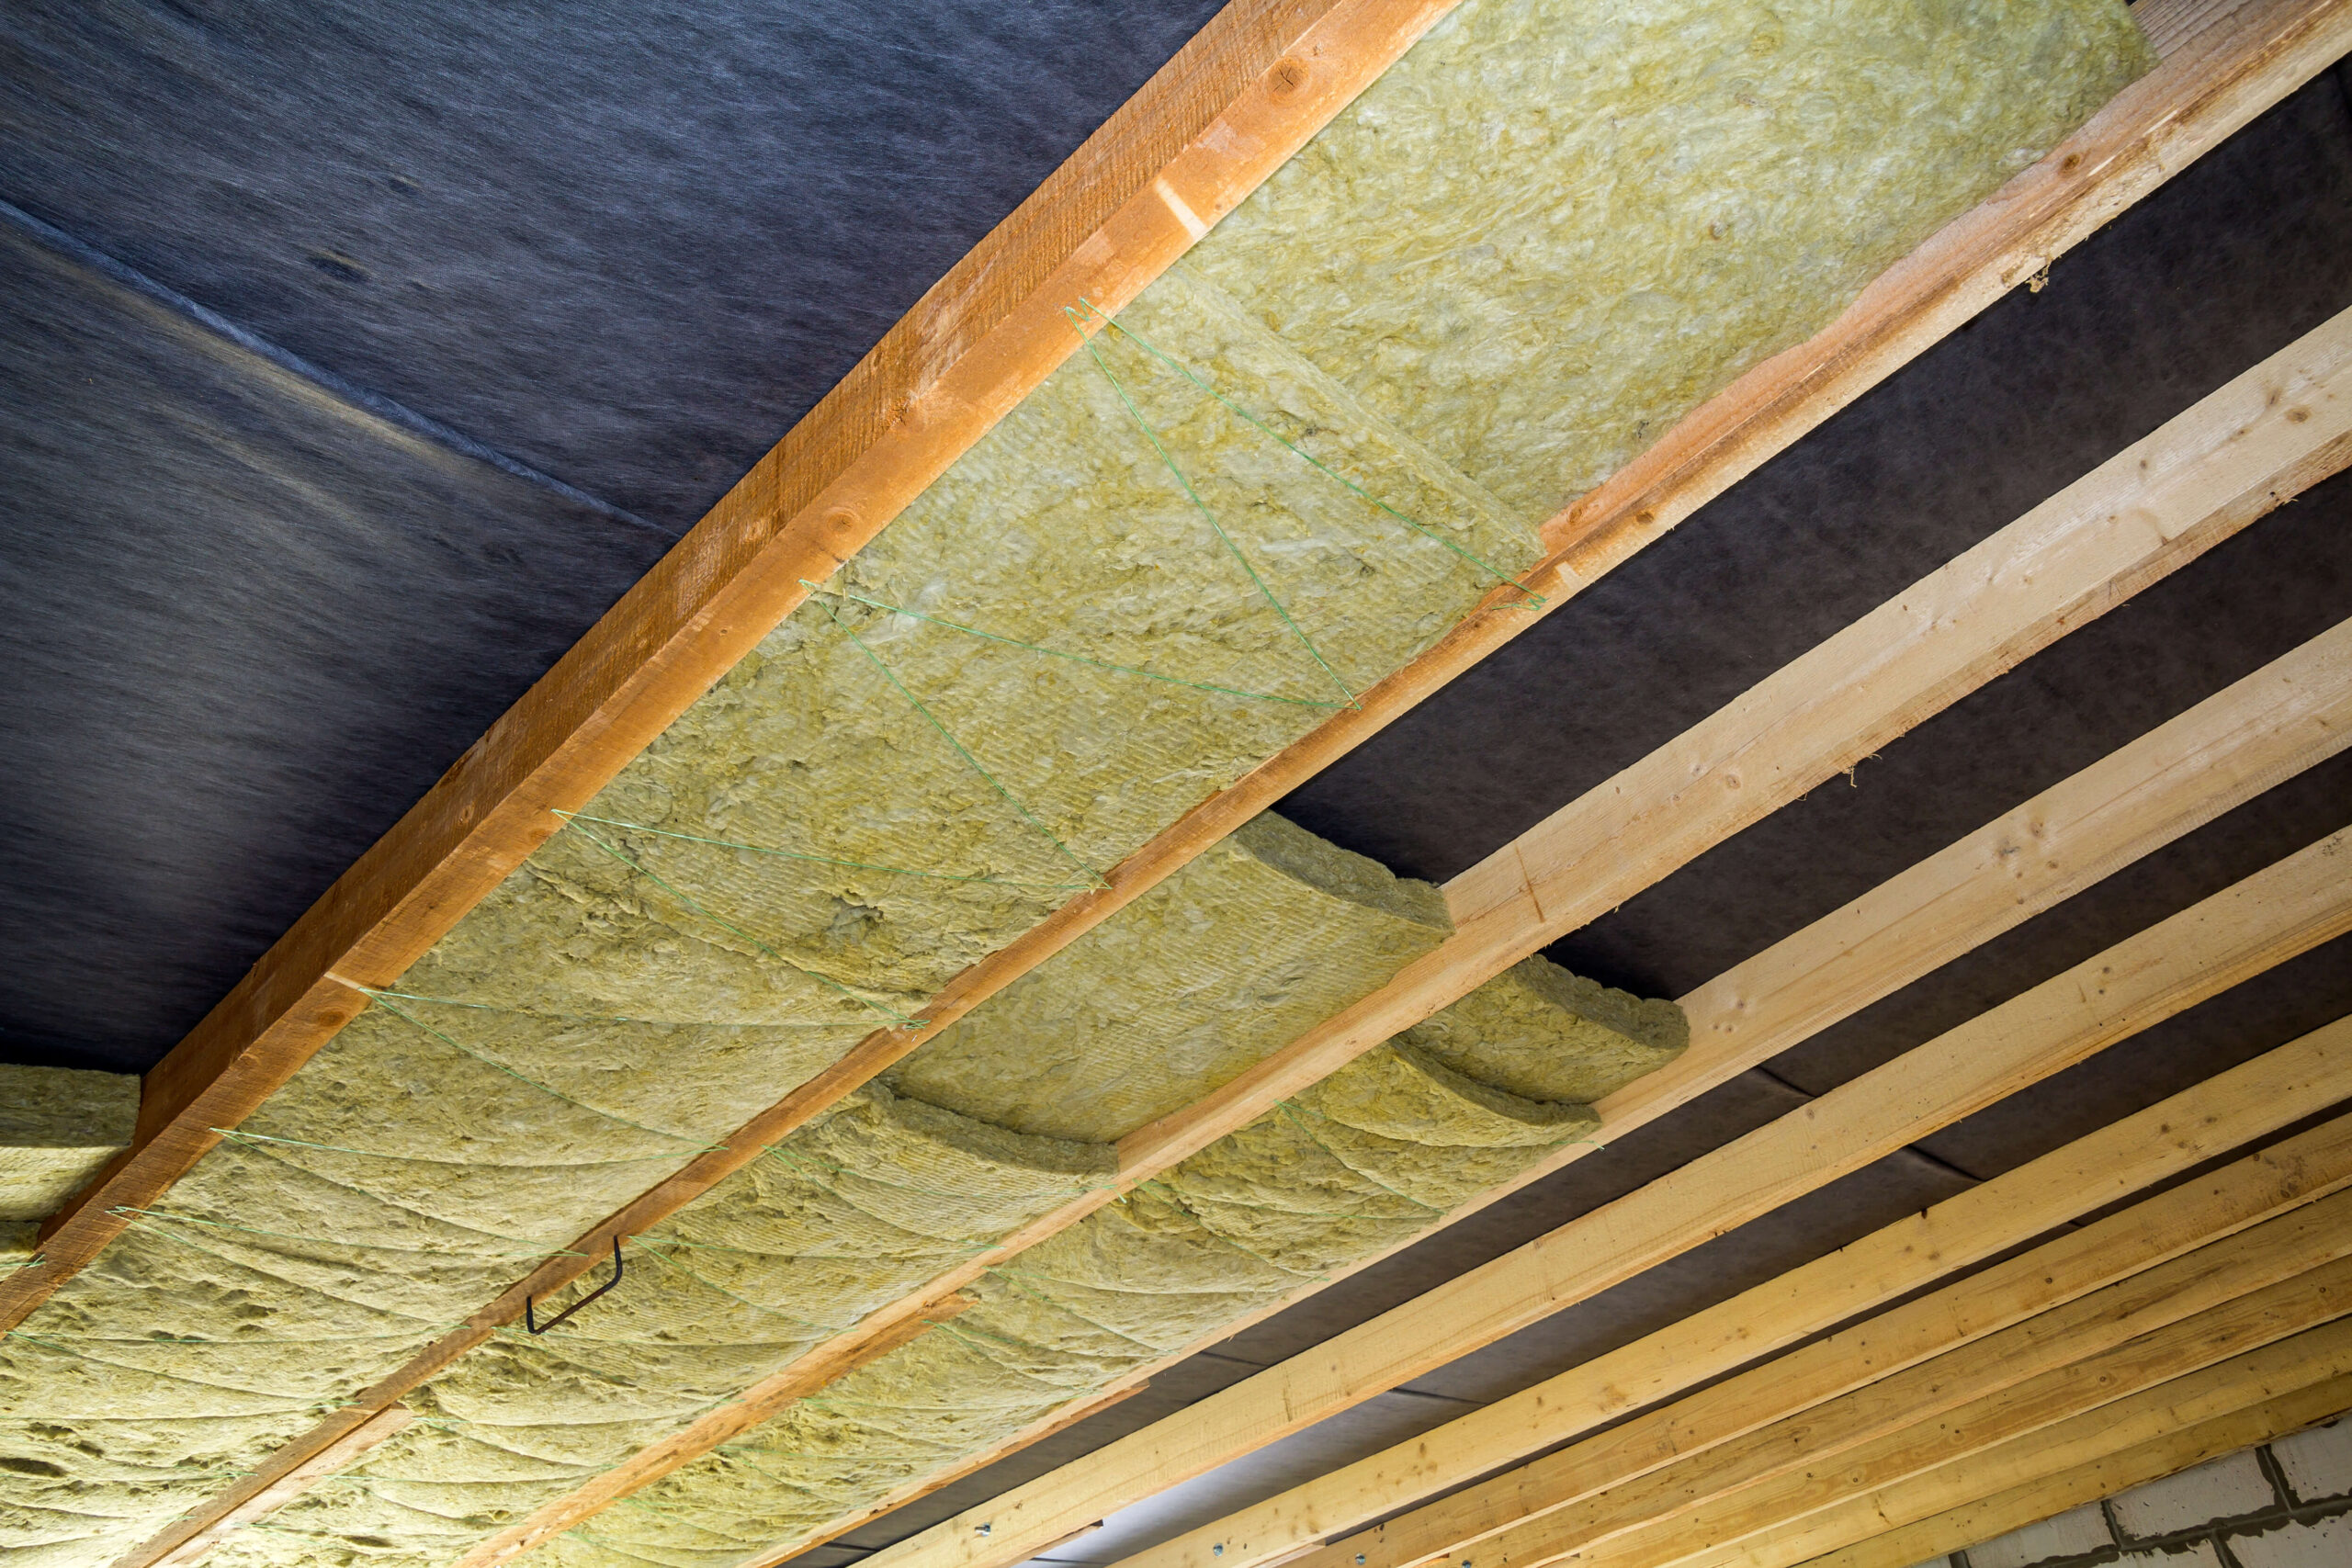 A room with wood beams and insulation in the ceiling.